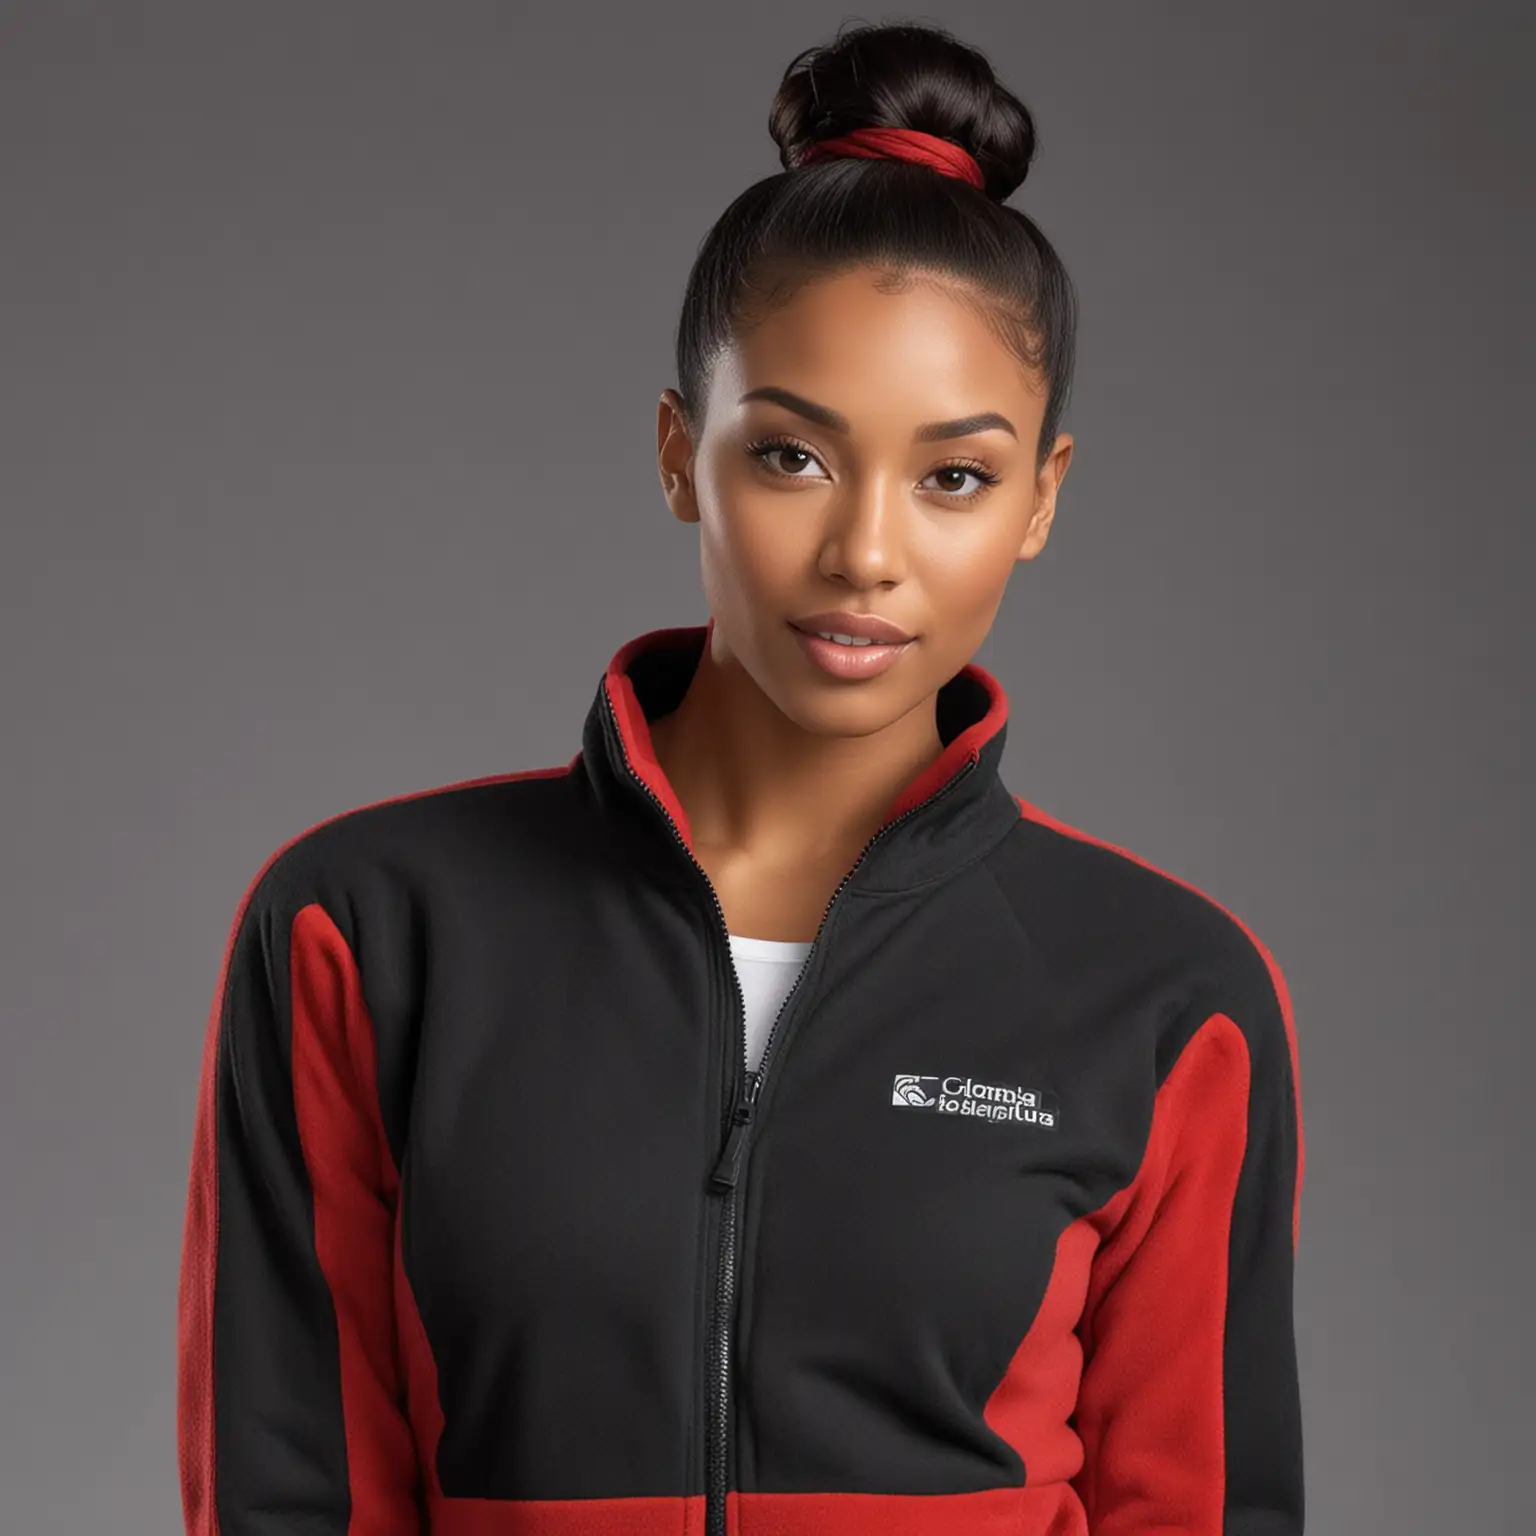 An attractive 32 year old Tall, leggy, 6 ft 2 tall, African-American female with black-colored Hair, oblong-shaped female head, wearing a red-colored form-fitting Columbia-branded fleece jacket, black-colored sleek and straight, single tight top knotted high bun, neat and flat hair, thick build, curvy frame, front view only, full body, kissy-face gesture, well-detailed face, focused on face, looking directly at the viewer, high-quality face, perfect picture